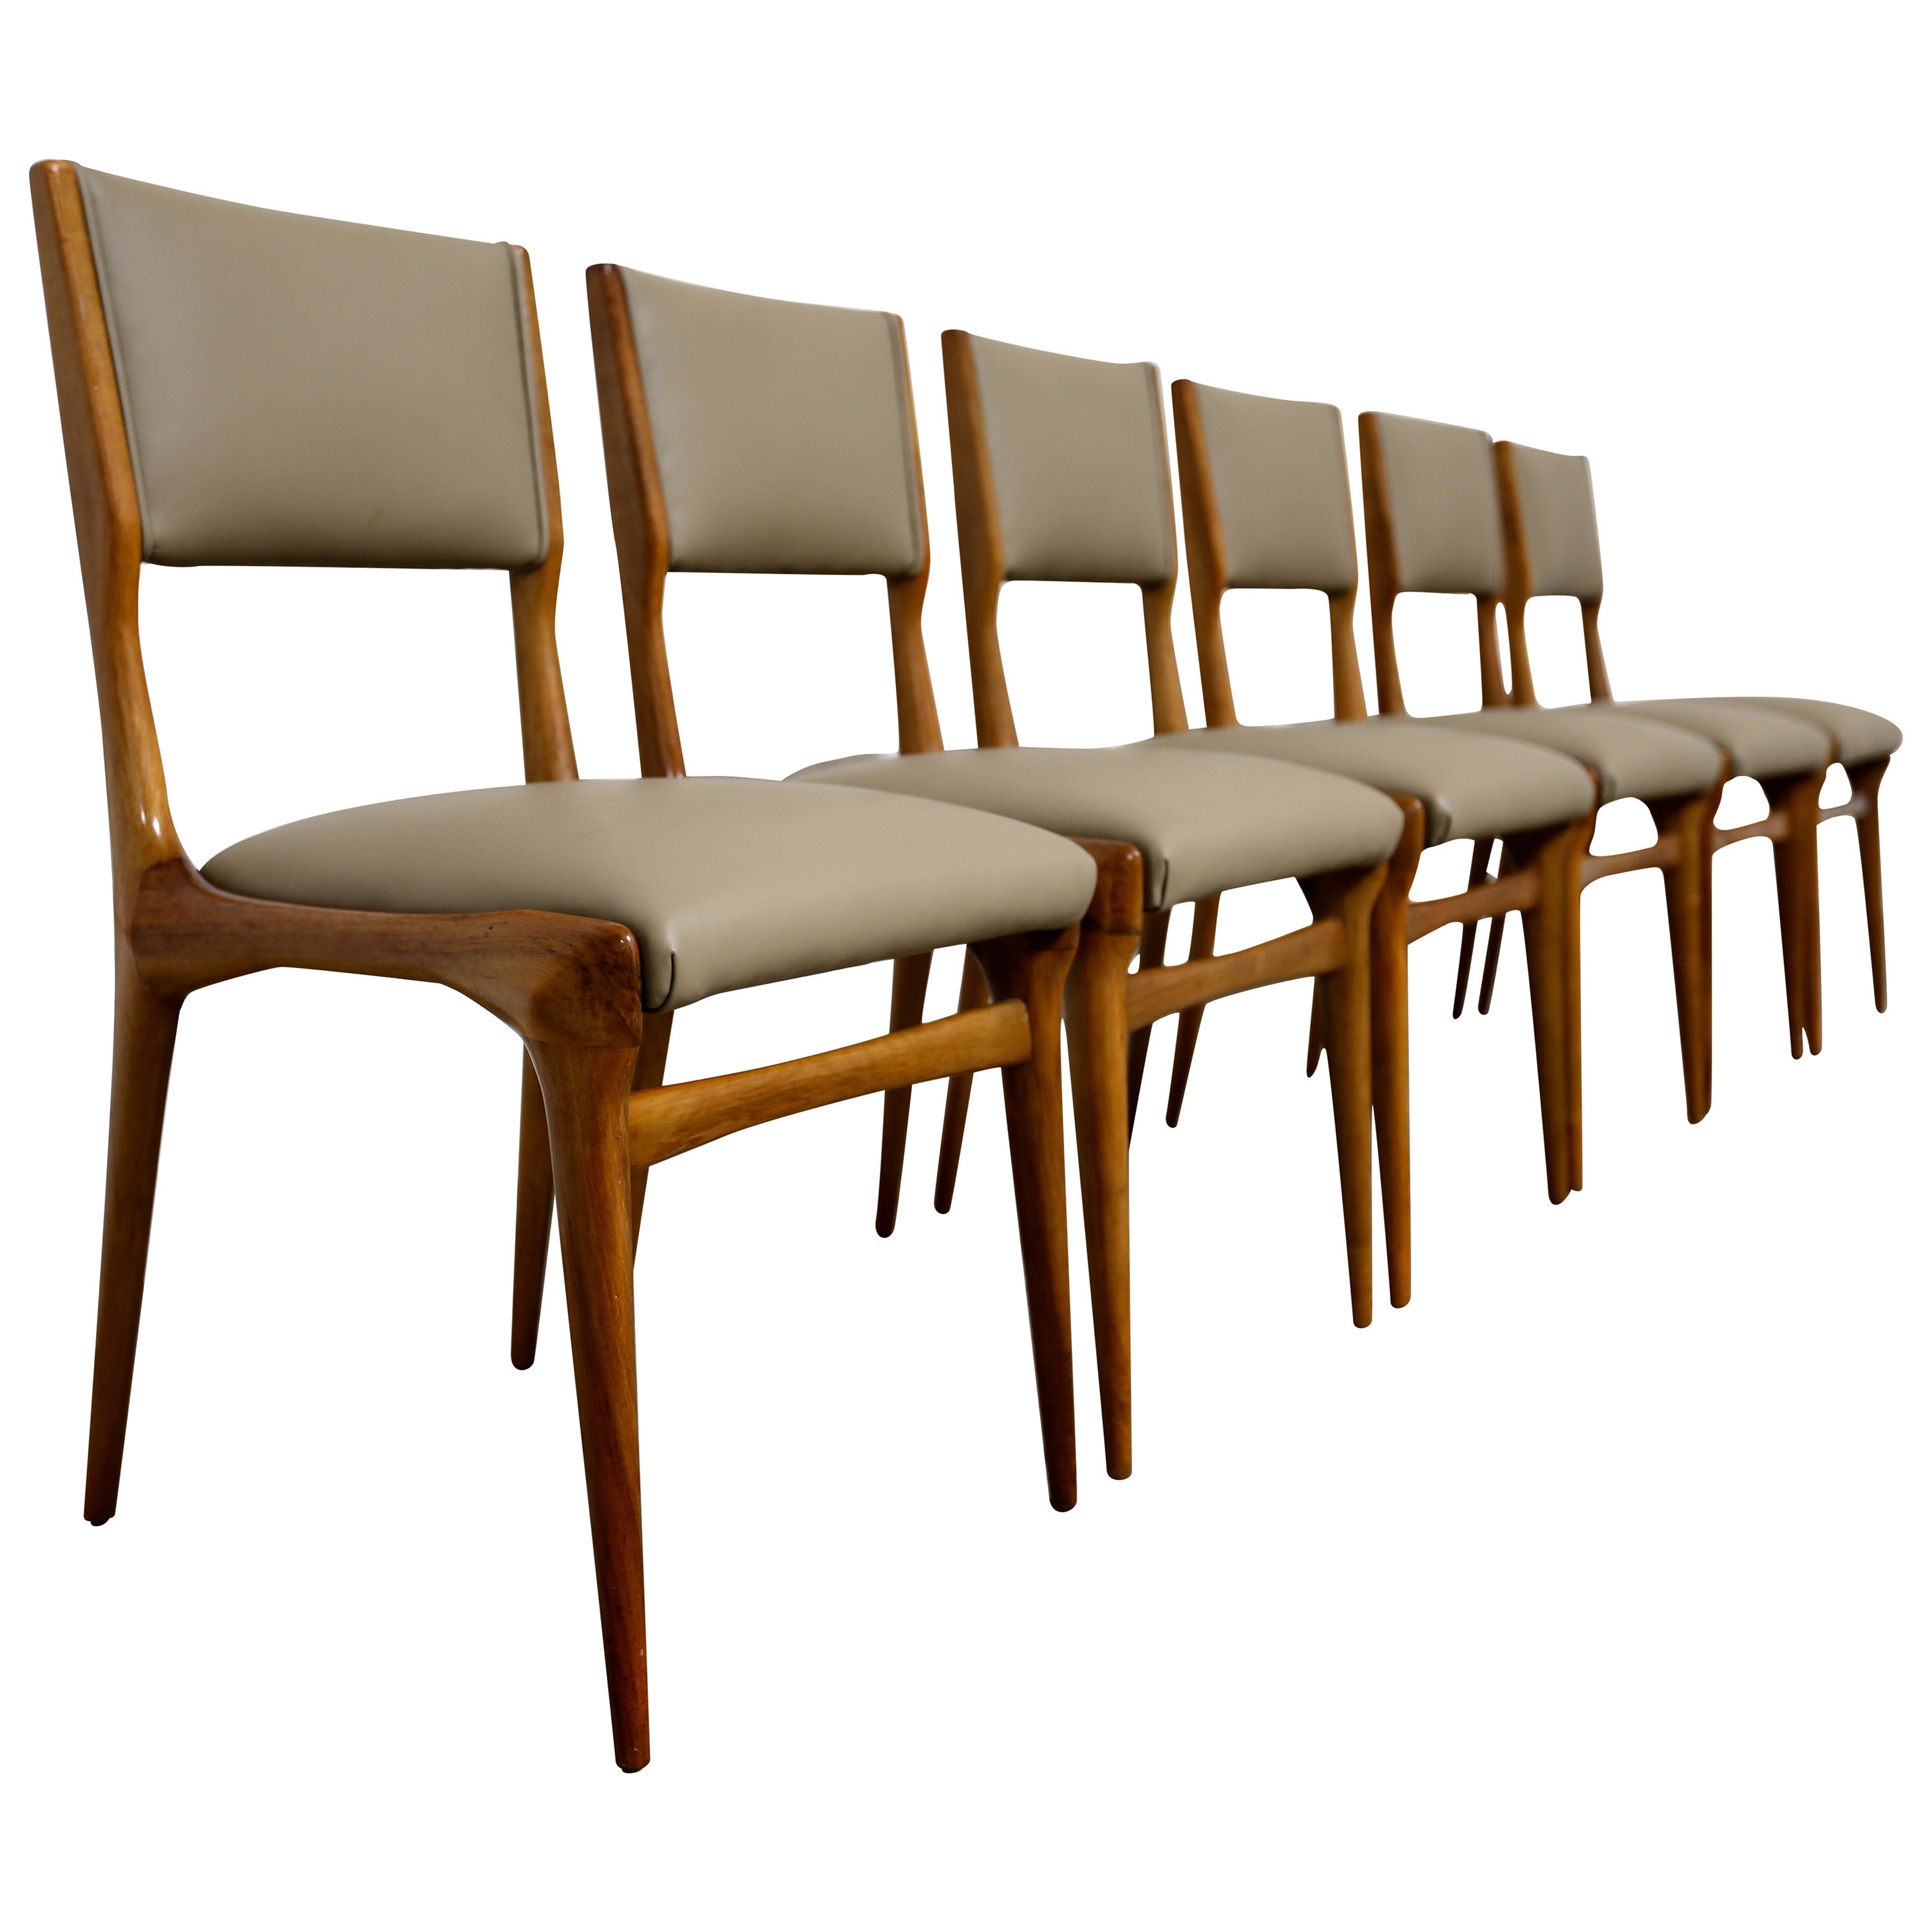 Set of Six Sculptural Italian Dining Chairs by Carlo de Carli